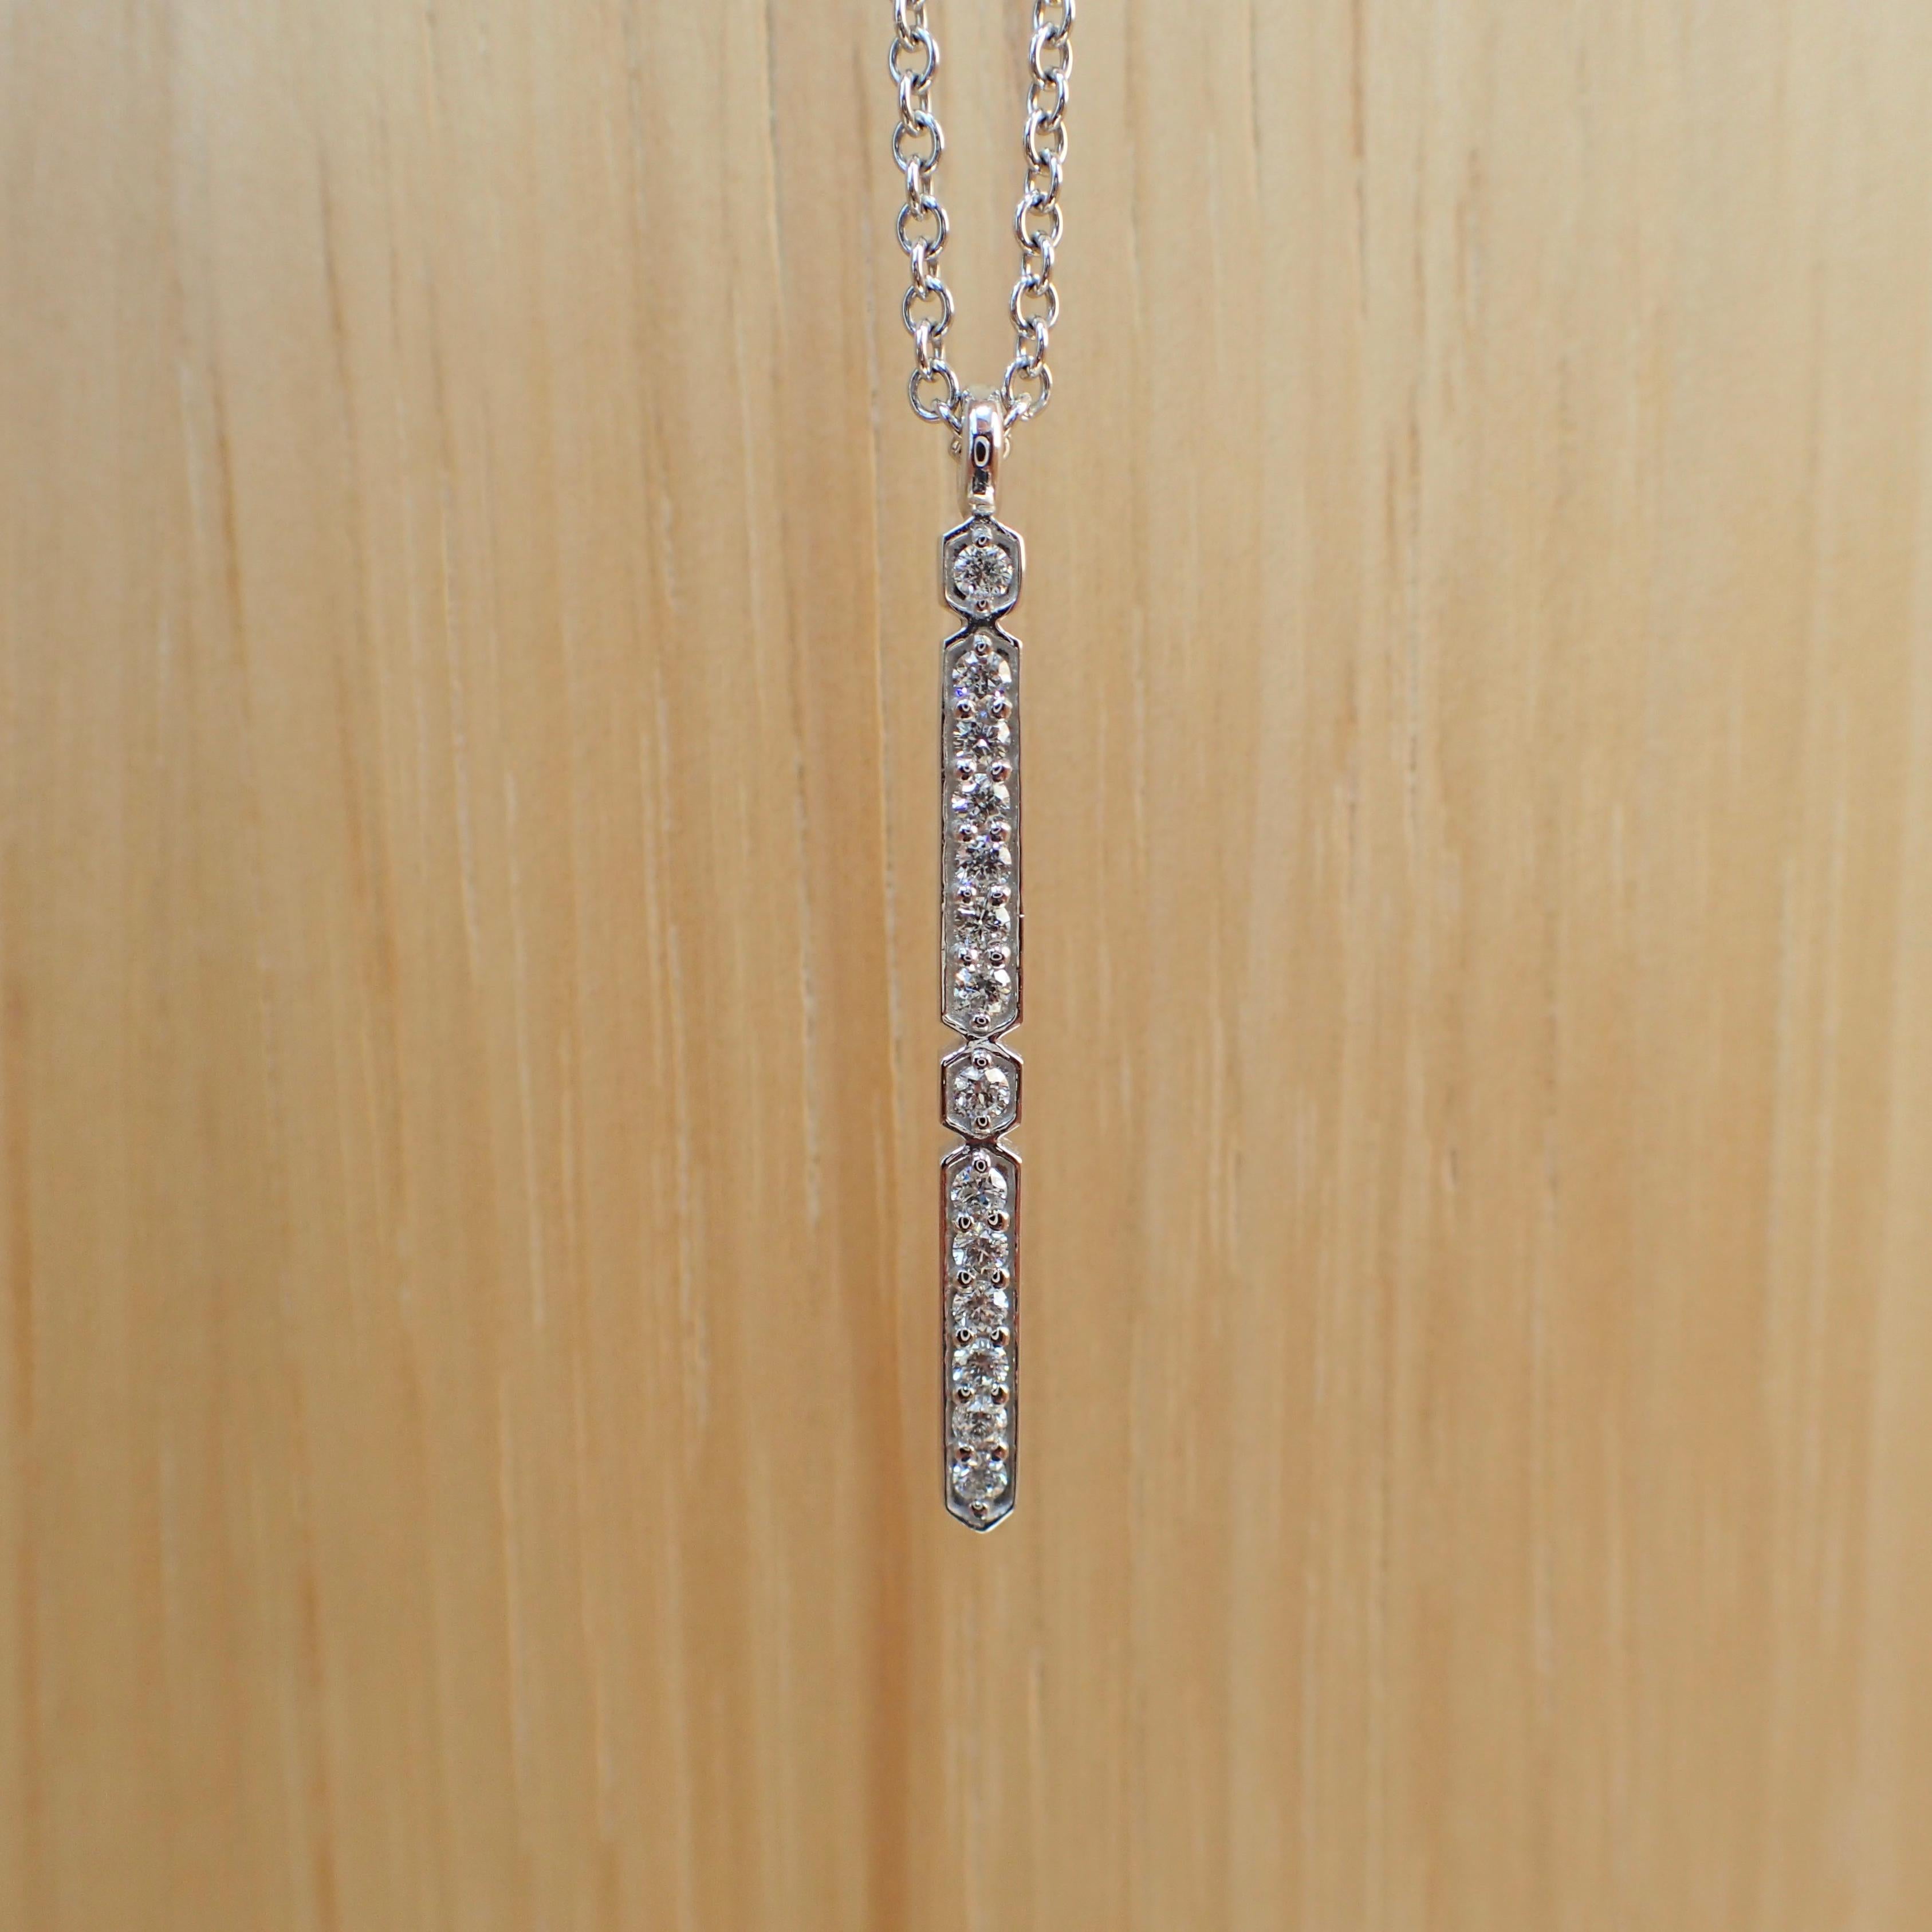 18k White Gold 24” long 1.5mm Cable Chain with Pendant that contains fourteen (14) 1.5mm Round Brilliant Cut Diamonds that weigh a total of 0.21 carats and have Clarity Grade VS and Color Grade G. The diamond bar is 1.25